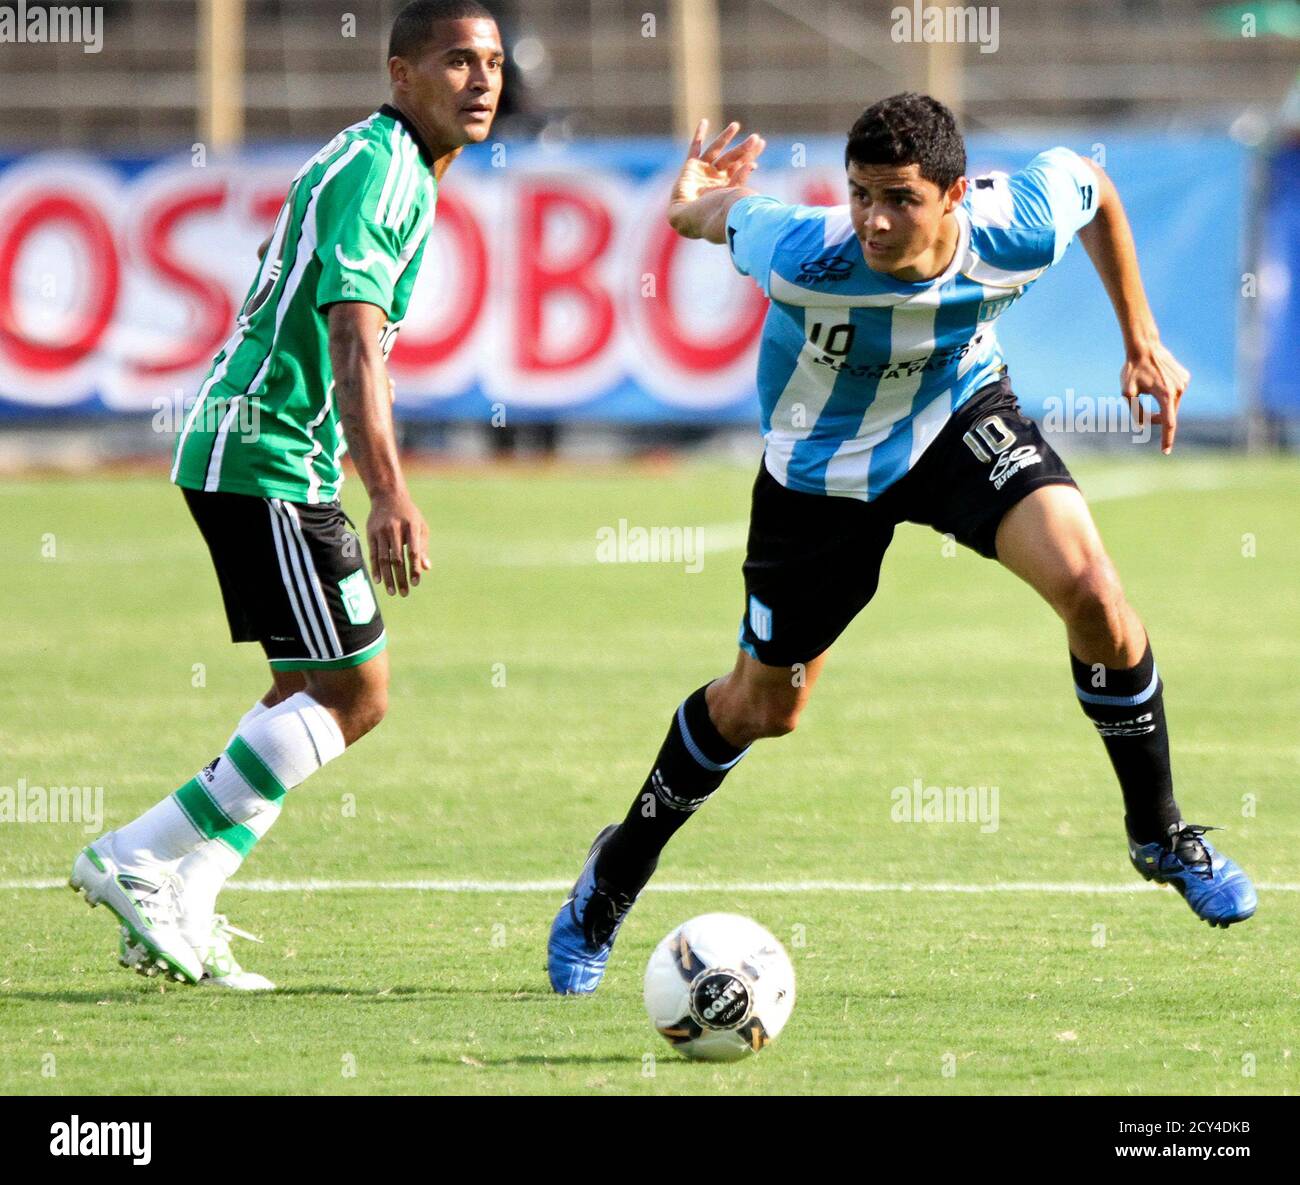 Giovanni Moreno (R) of Argentina's Racing Club runs past Macnelli Torres of  Colombia's Atletico Nacional during their friendly football match at  Atanasio Girardot stadium in Medellin January 30, 2011. REUTERS/ Albeiro  Lopera (